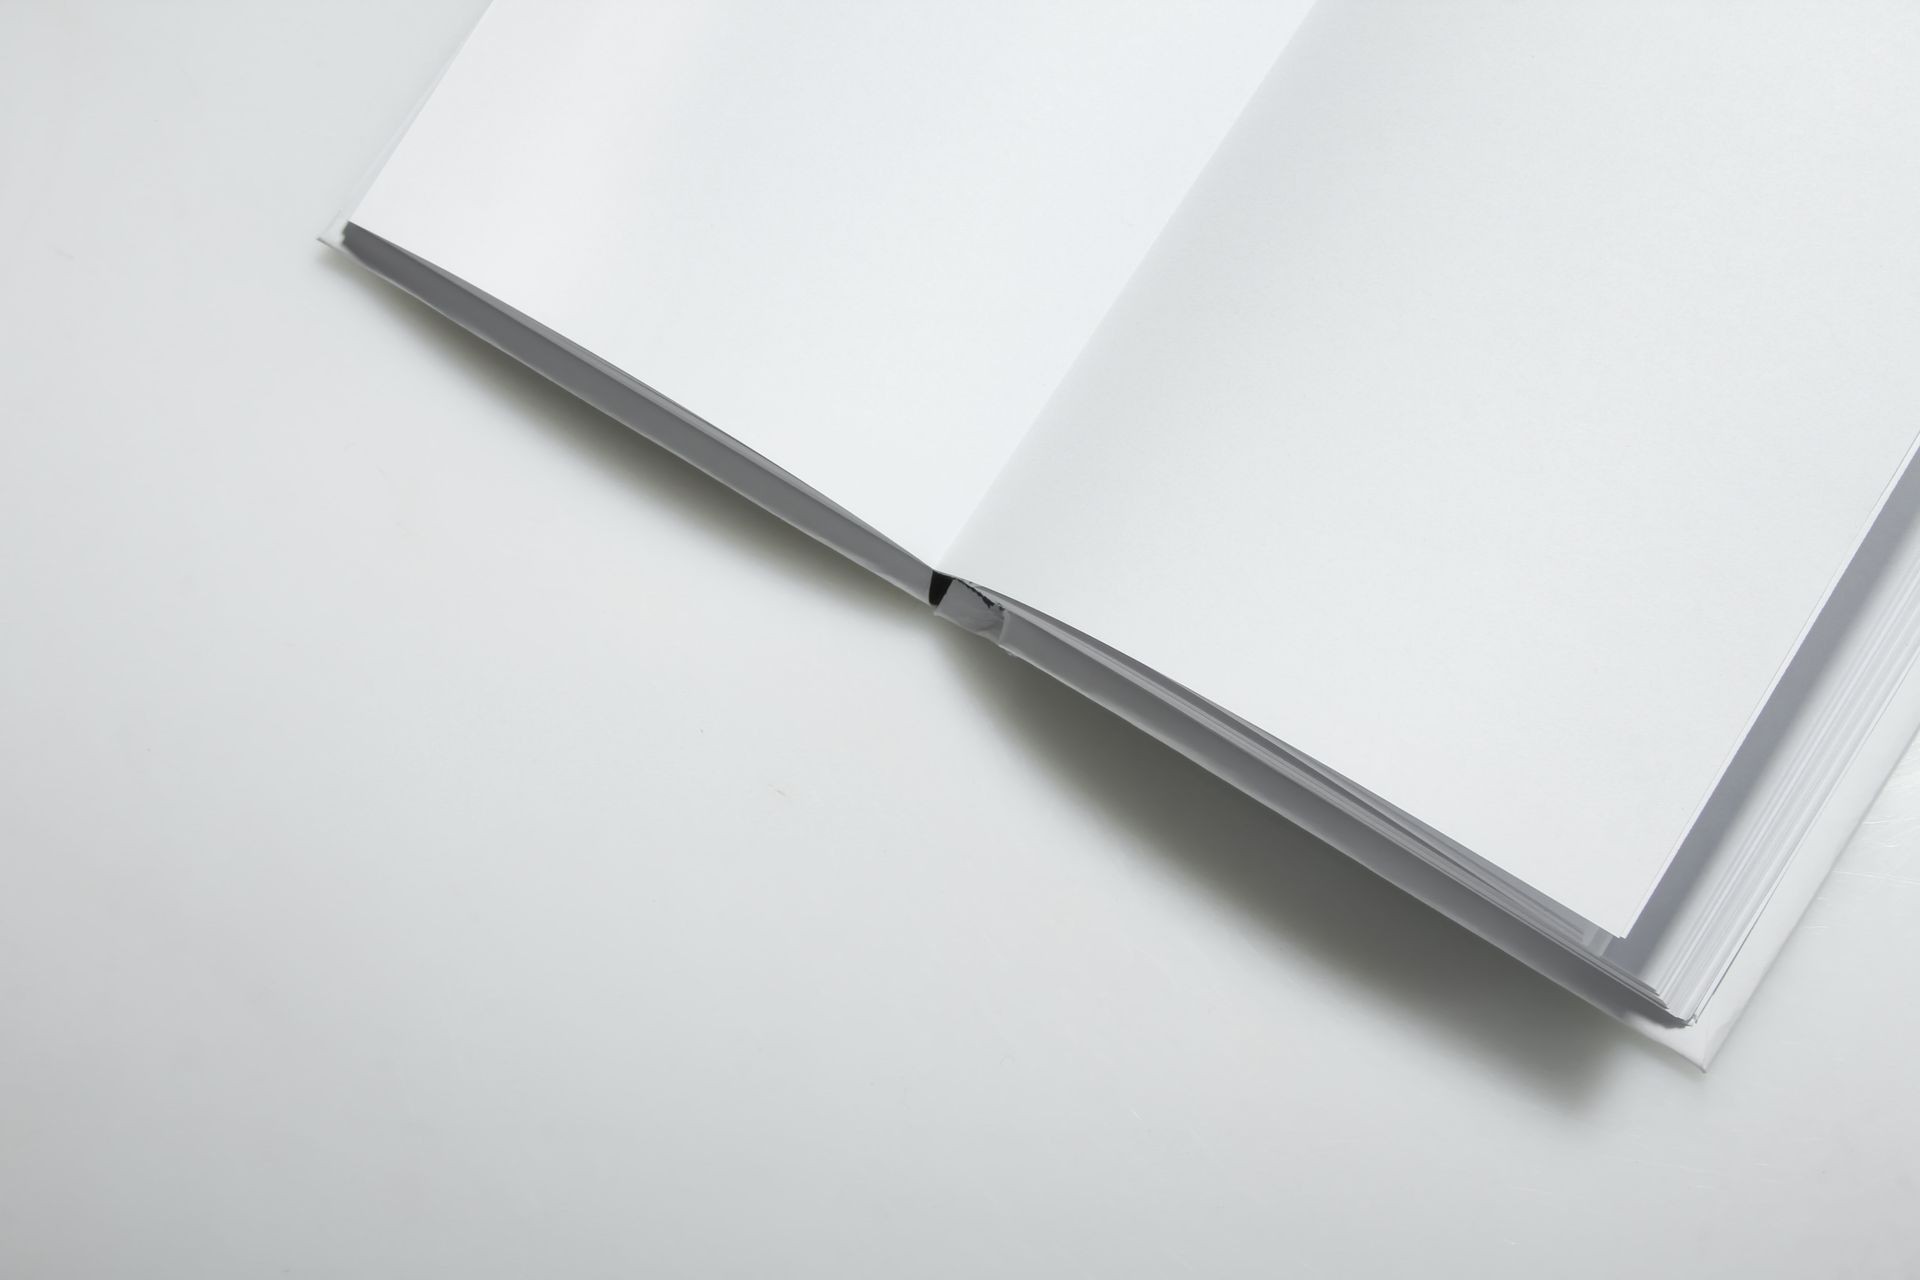 Open empty white book on a gray background.